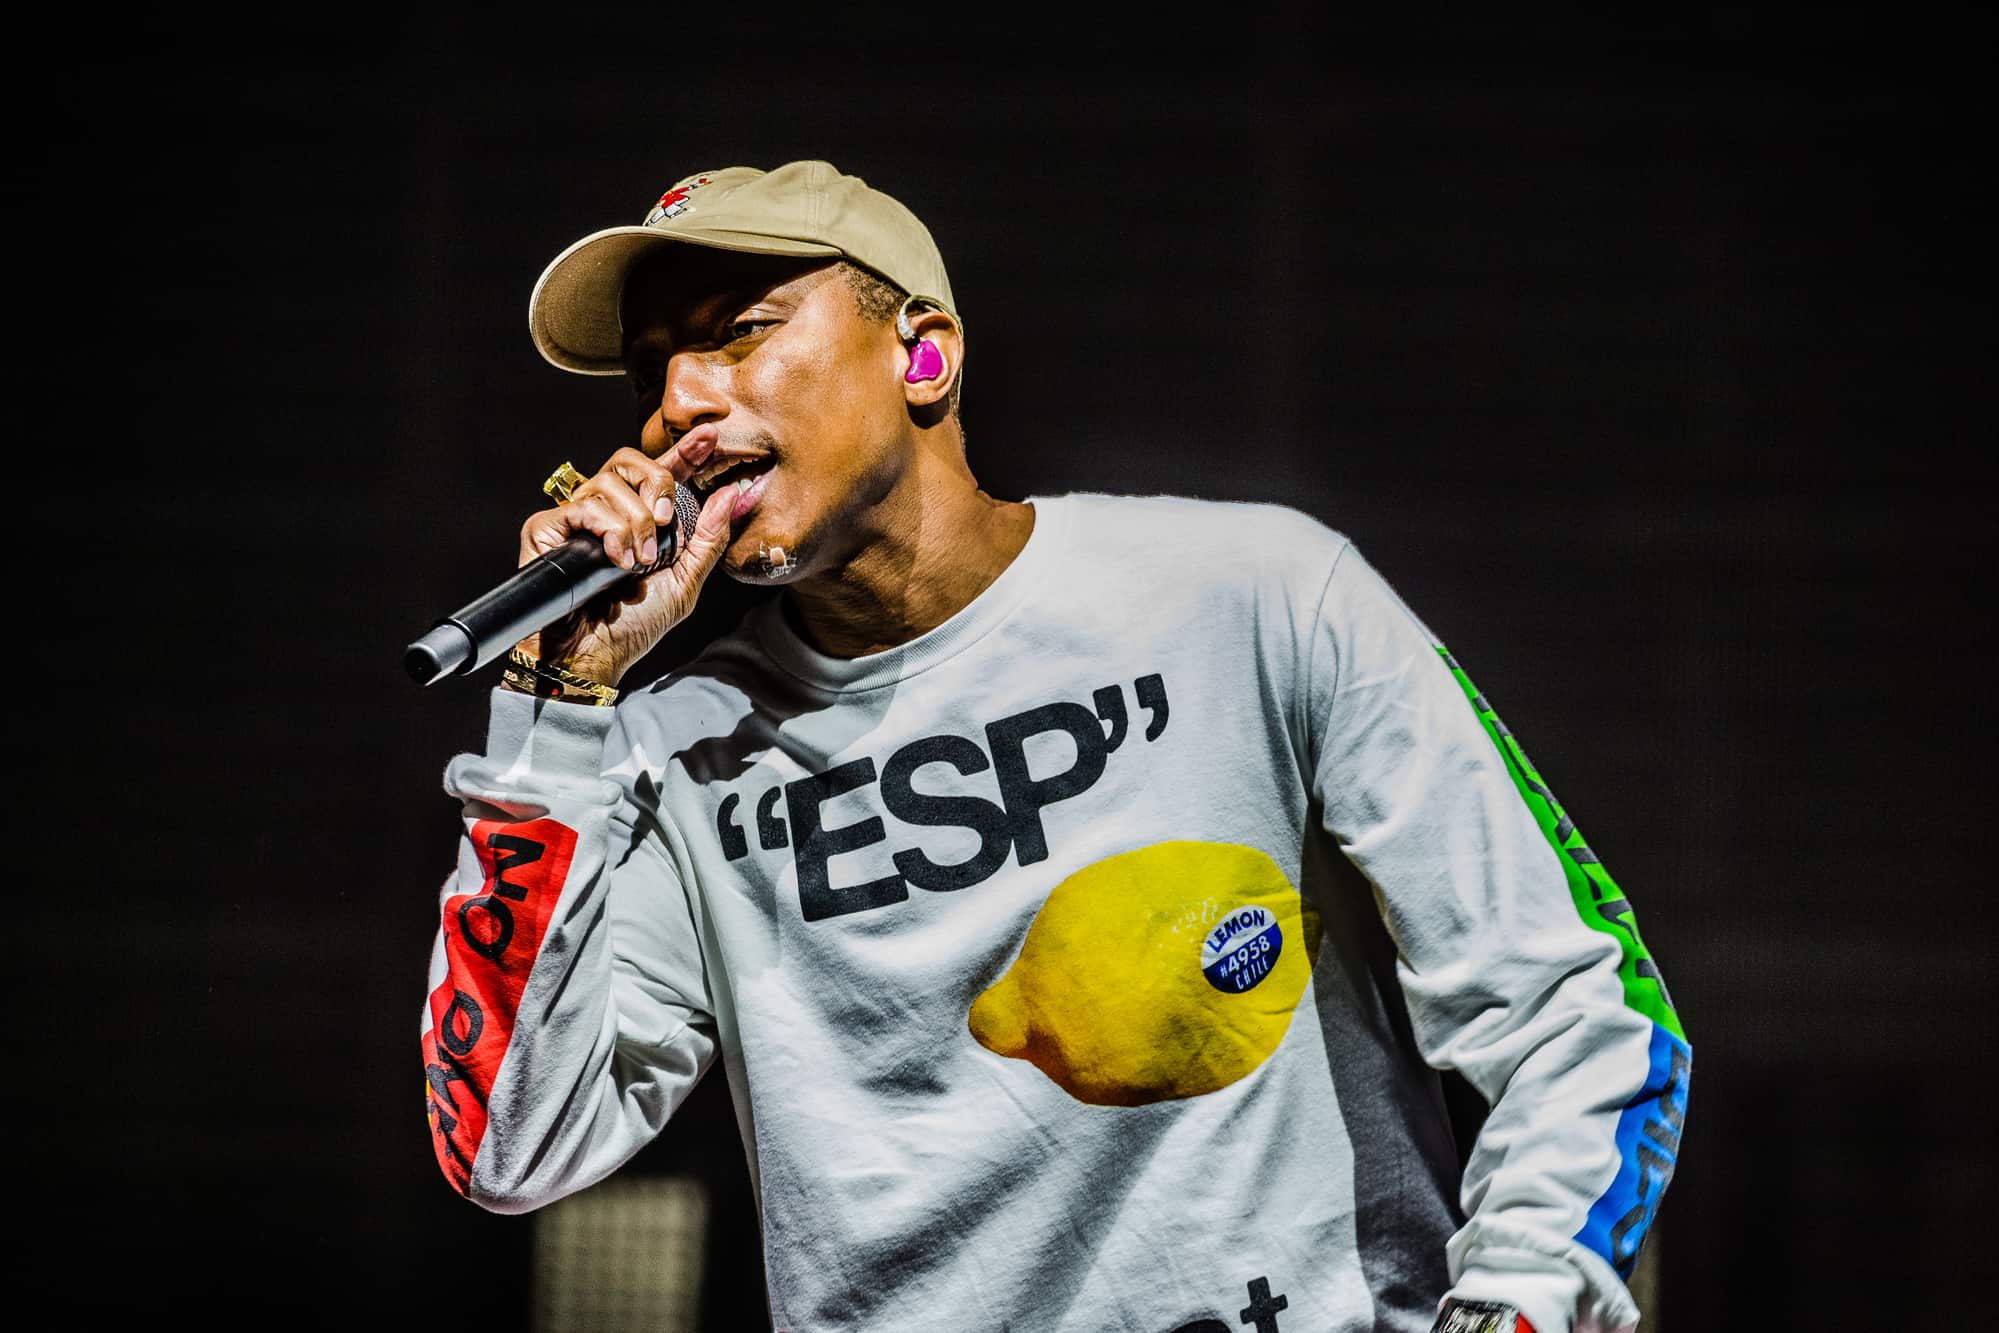 Pharrell's 'Something in the Water' festival releases 2023 lineup